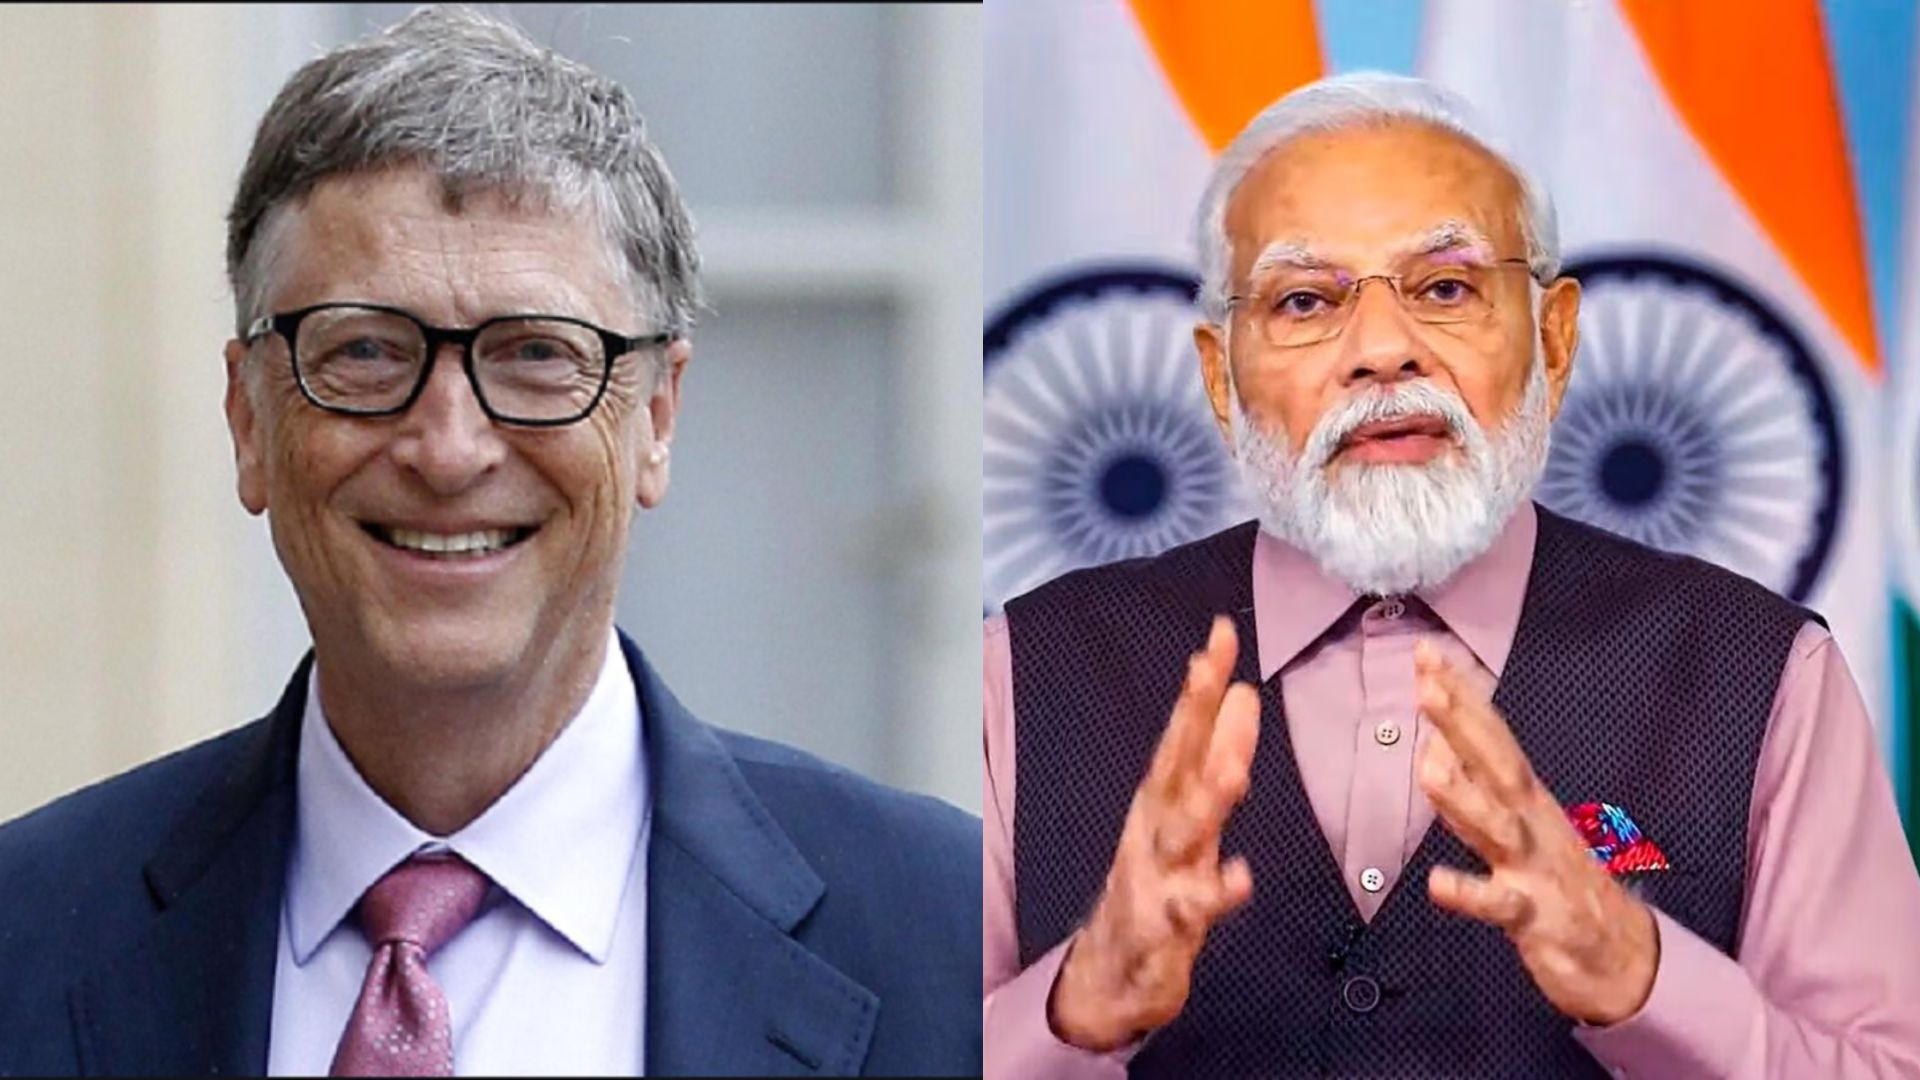 PM Modi and Bill Gates engage in discussions covering AI, climate change, women’s empowerment